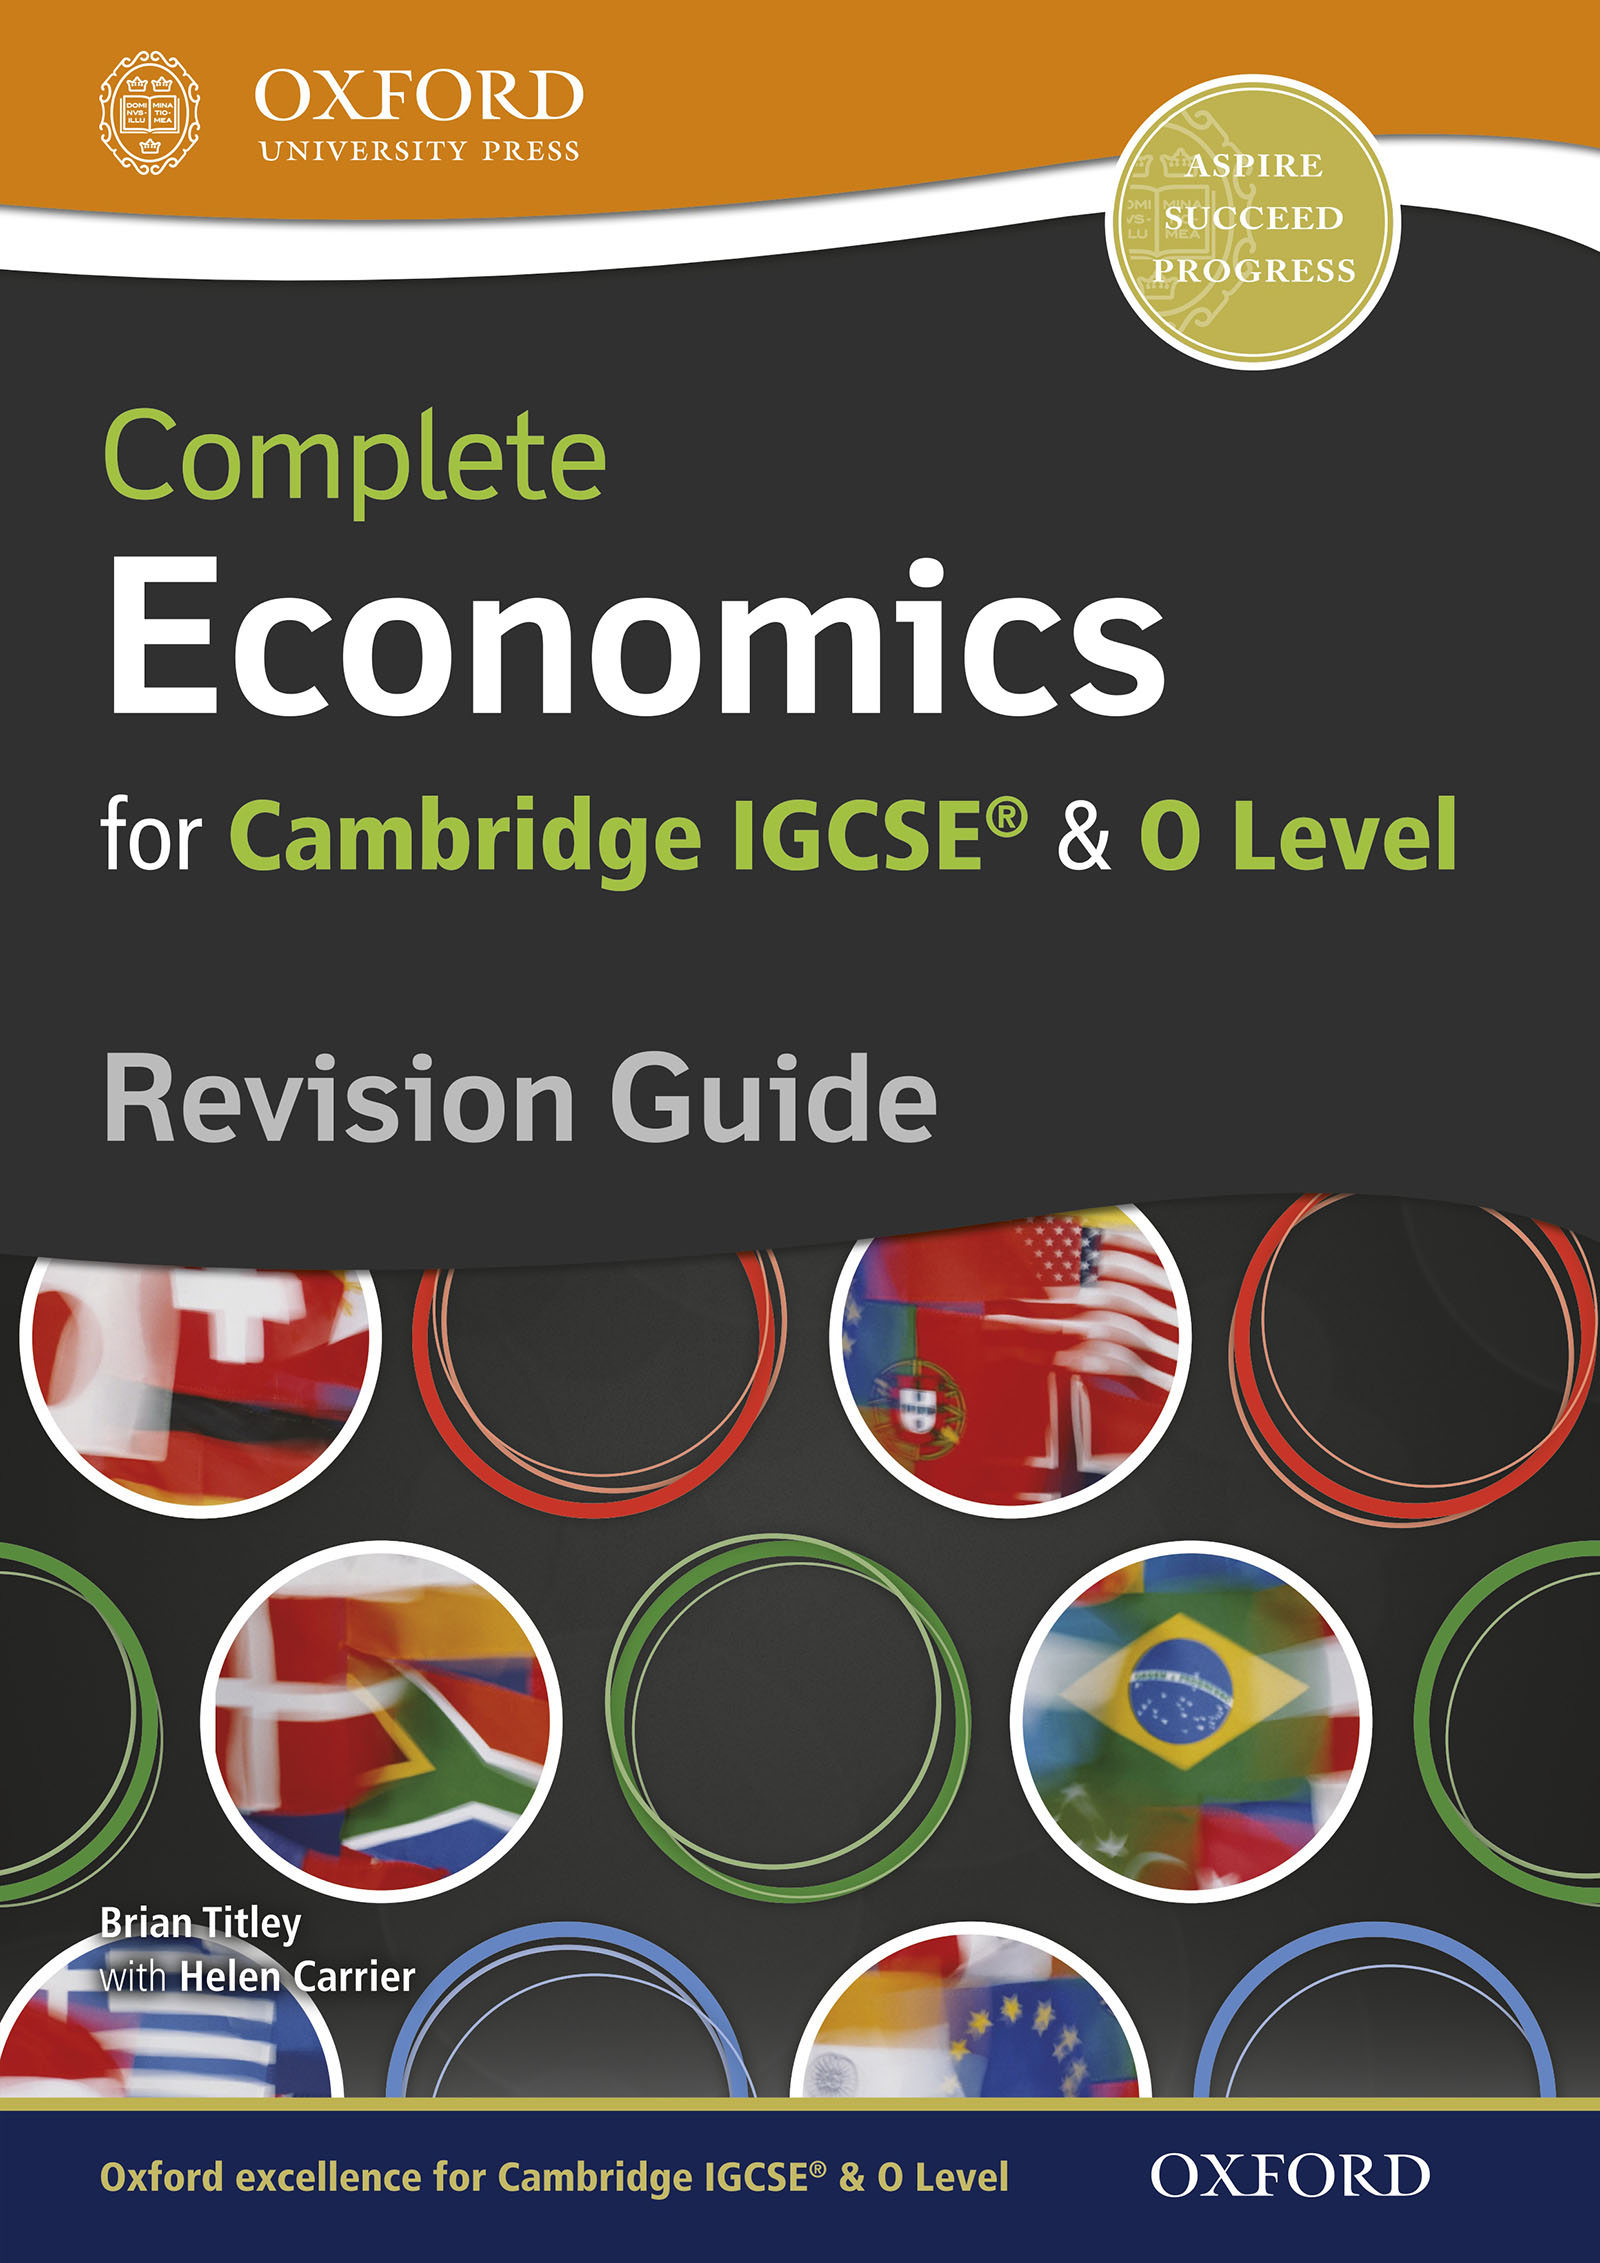 Complete Economics for Cambridge IGCSE and O Level Revision Guide